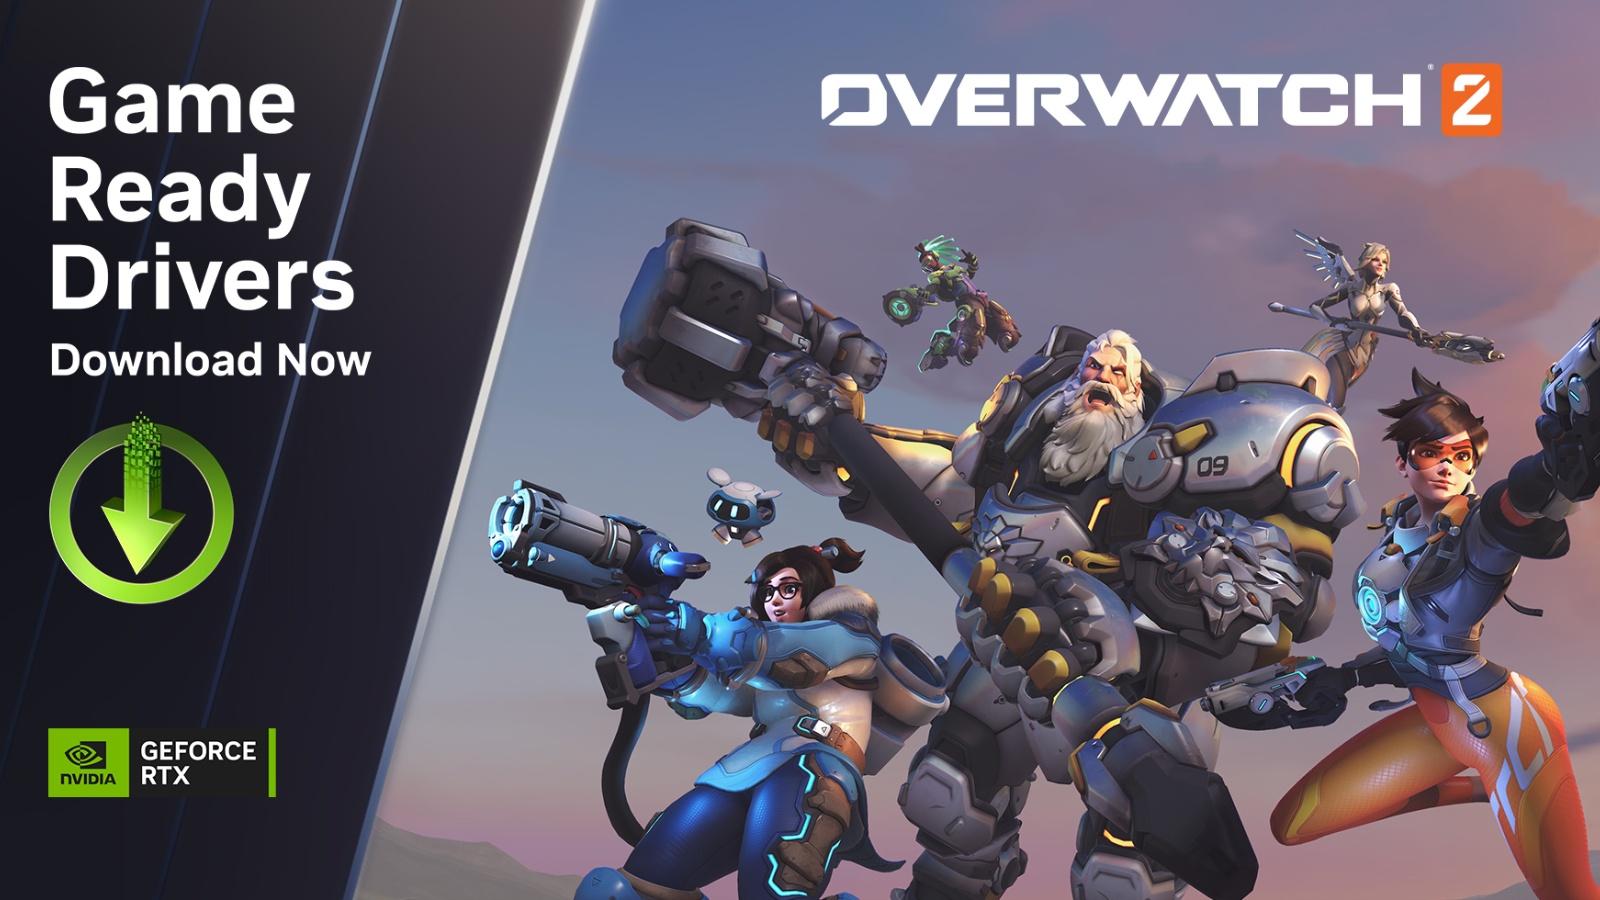 Nvidia GeForce Game Ready Drivers Overwatch 2